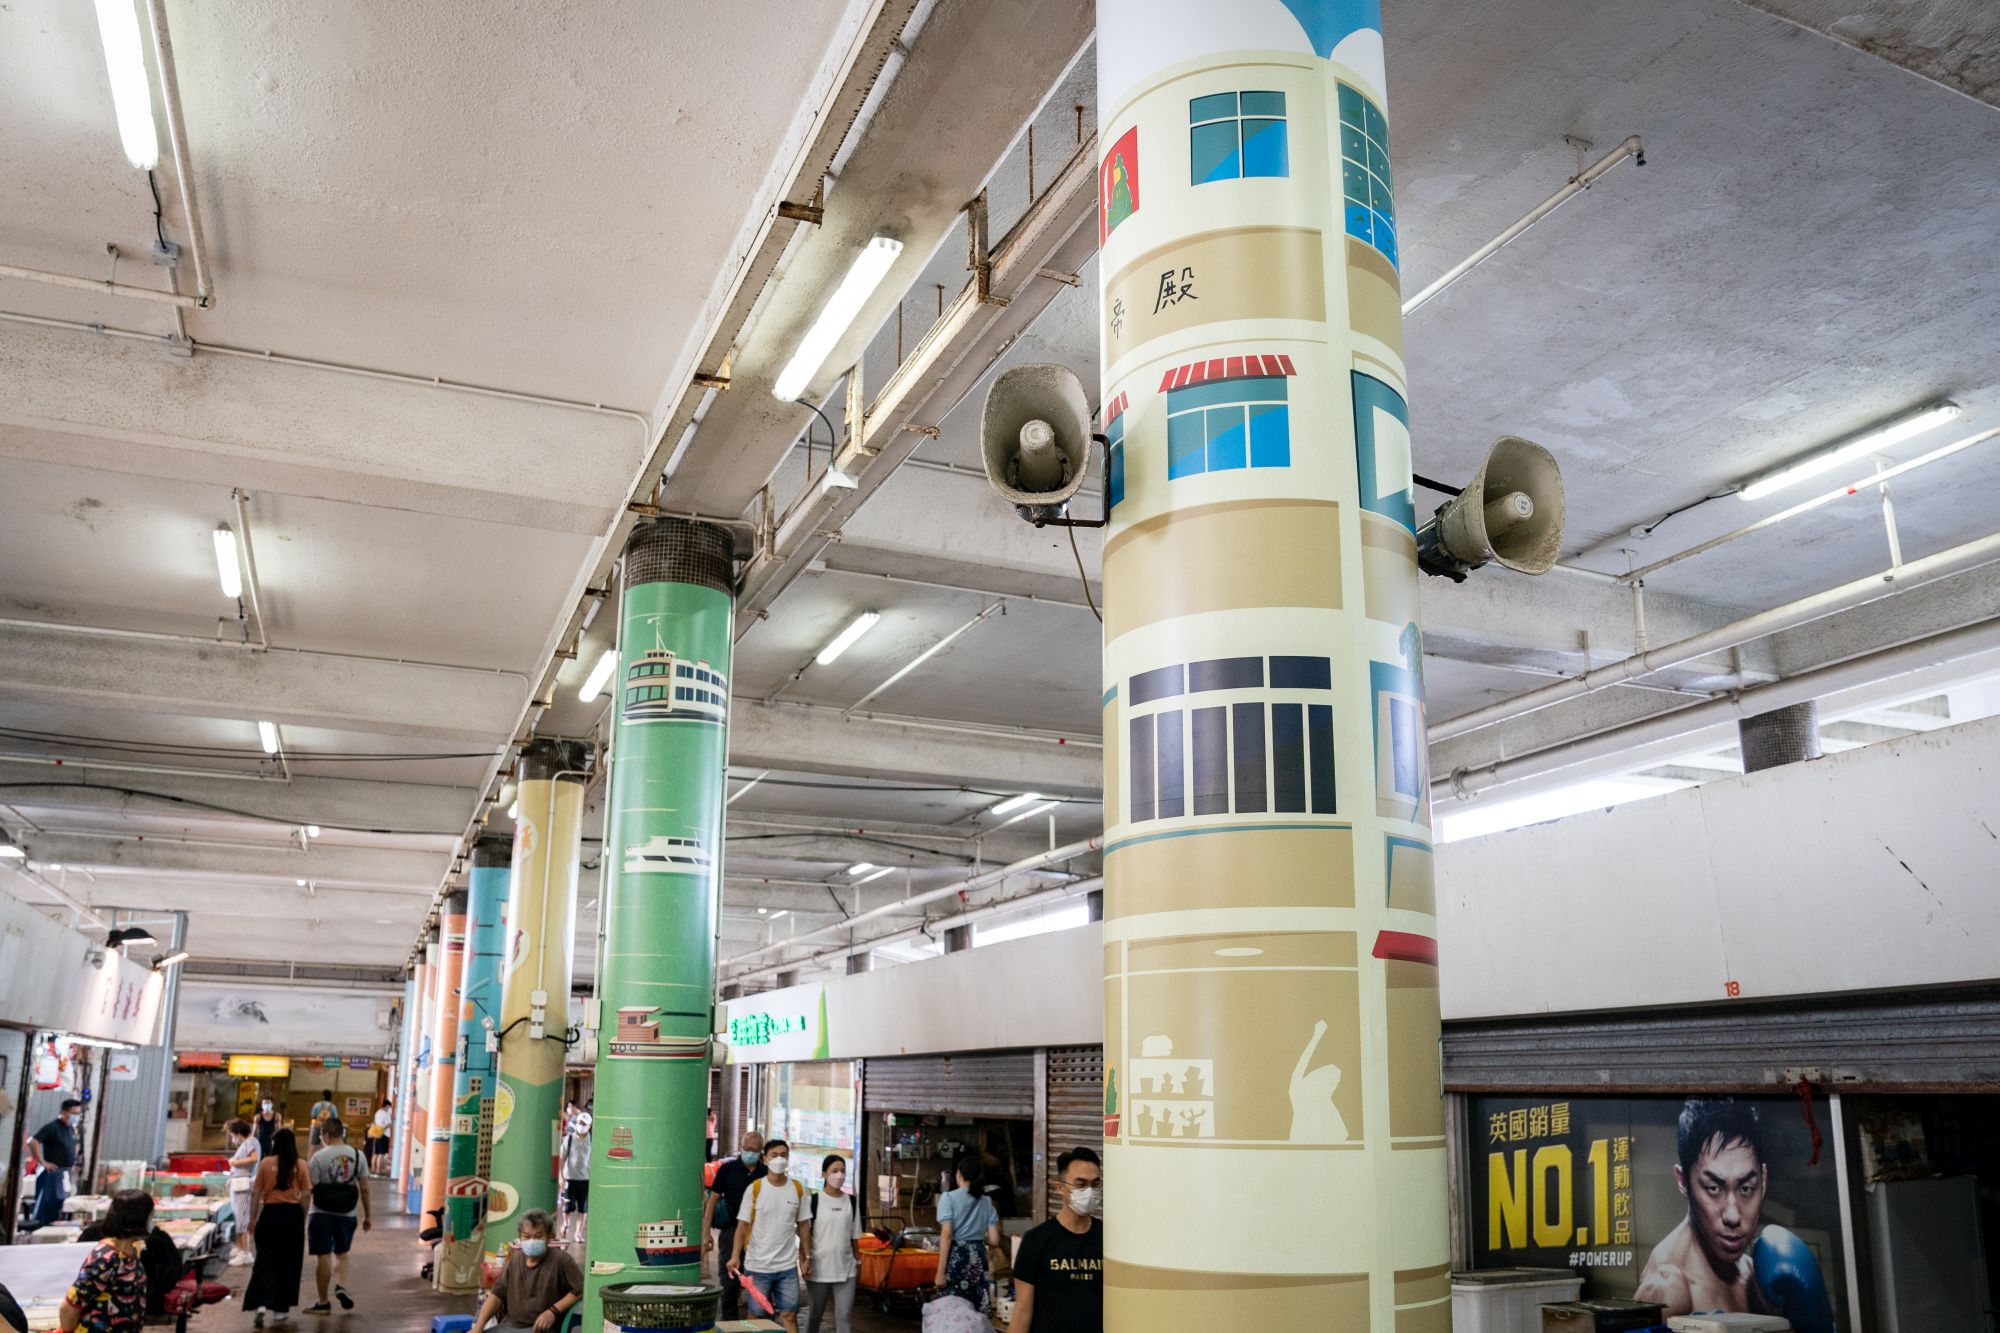 Funded by the URF, the “Via North Point” project features an array of artwork installations set up in Chun Yeung Street Sitting-Out Area, the North Point promenade and the North Point Ferry Pier to rejuvenate public spaces and showcase the unique glamour of North Point.